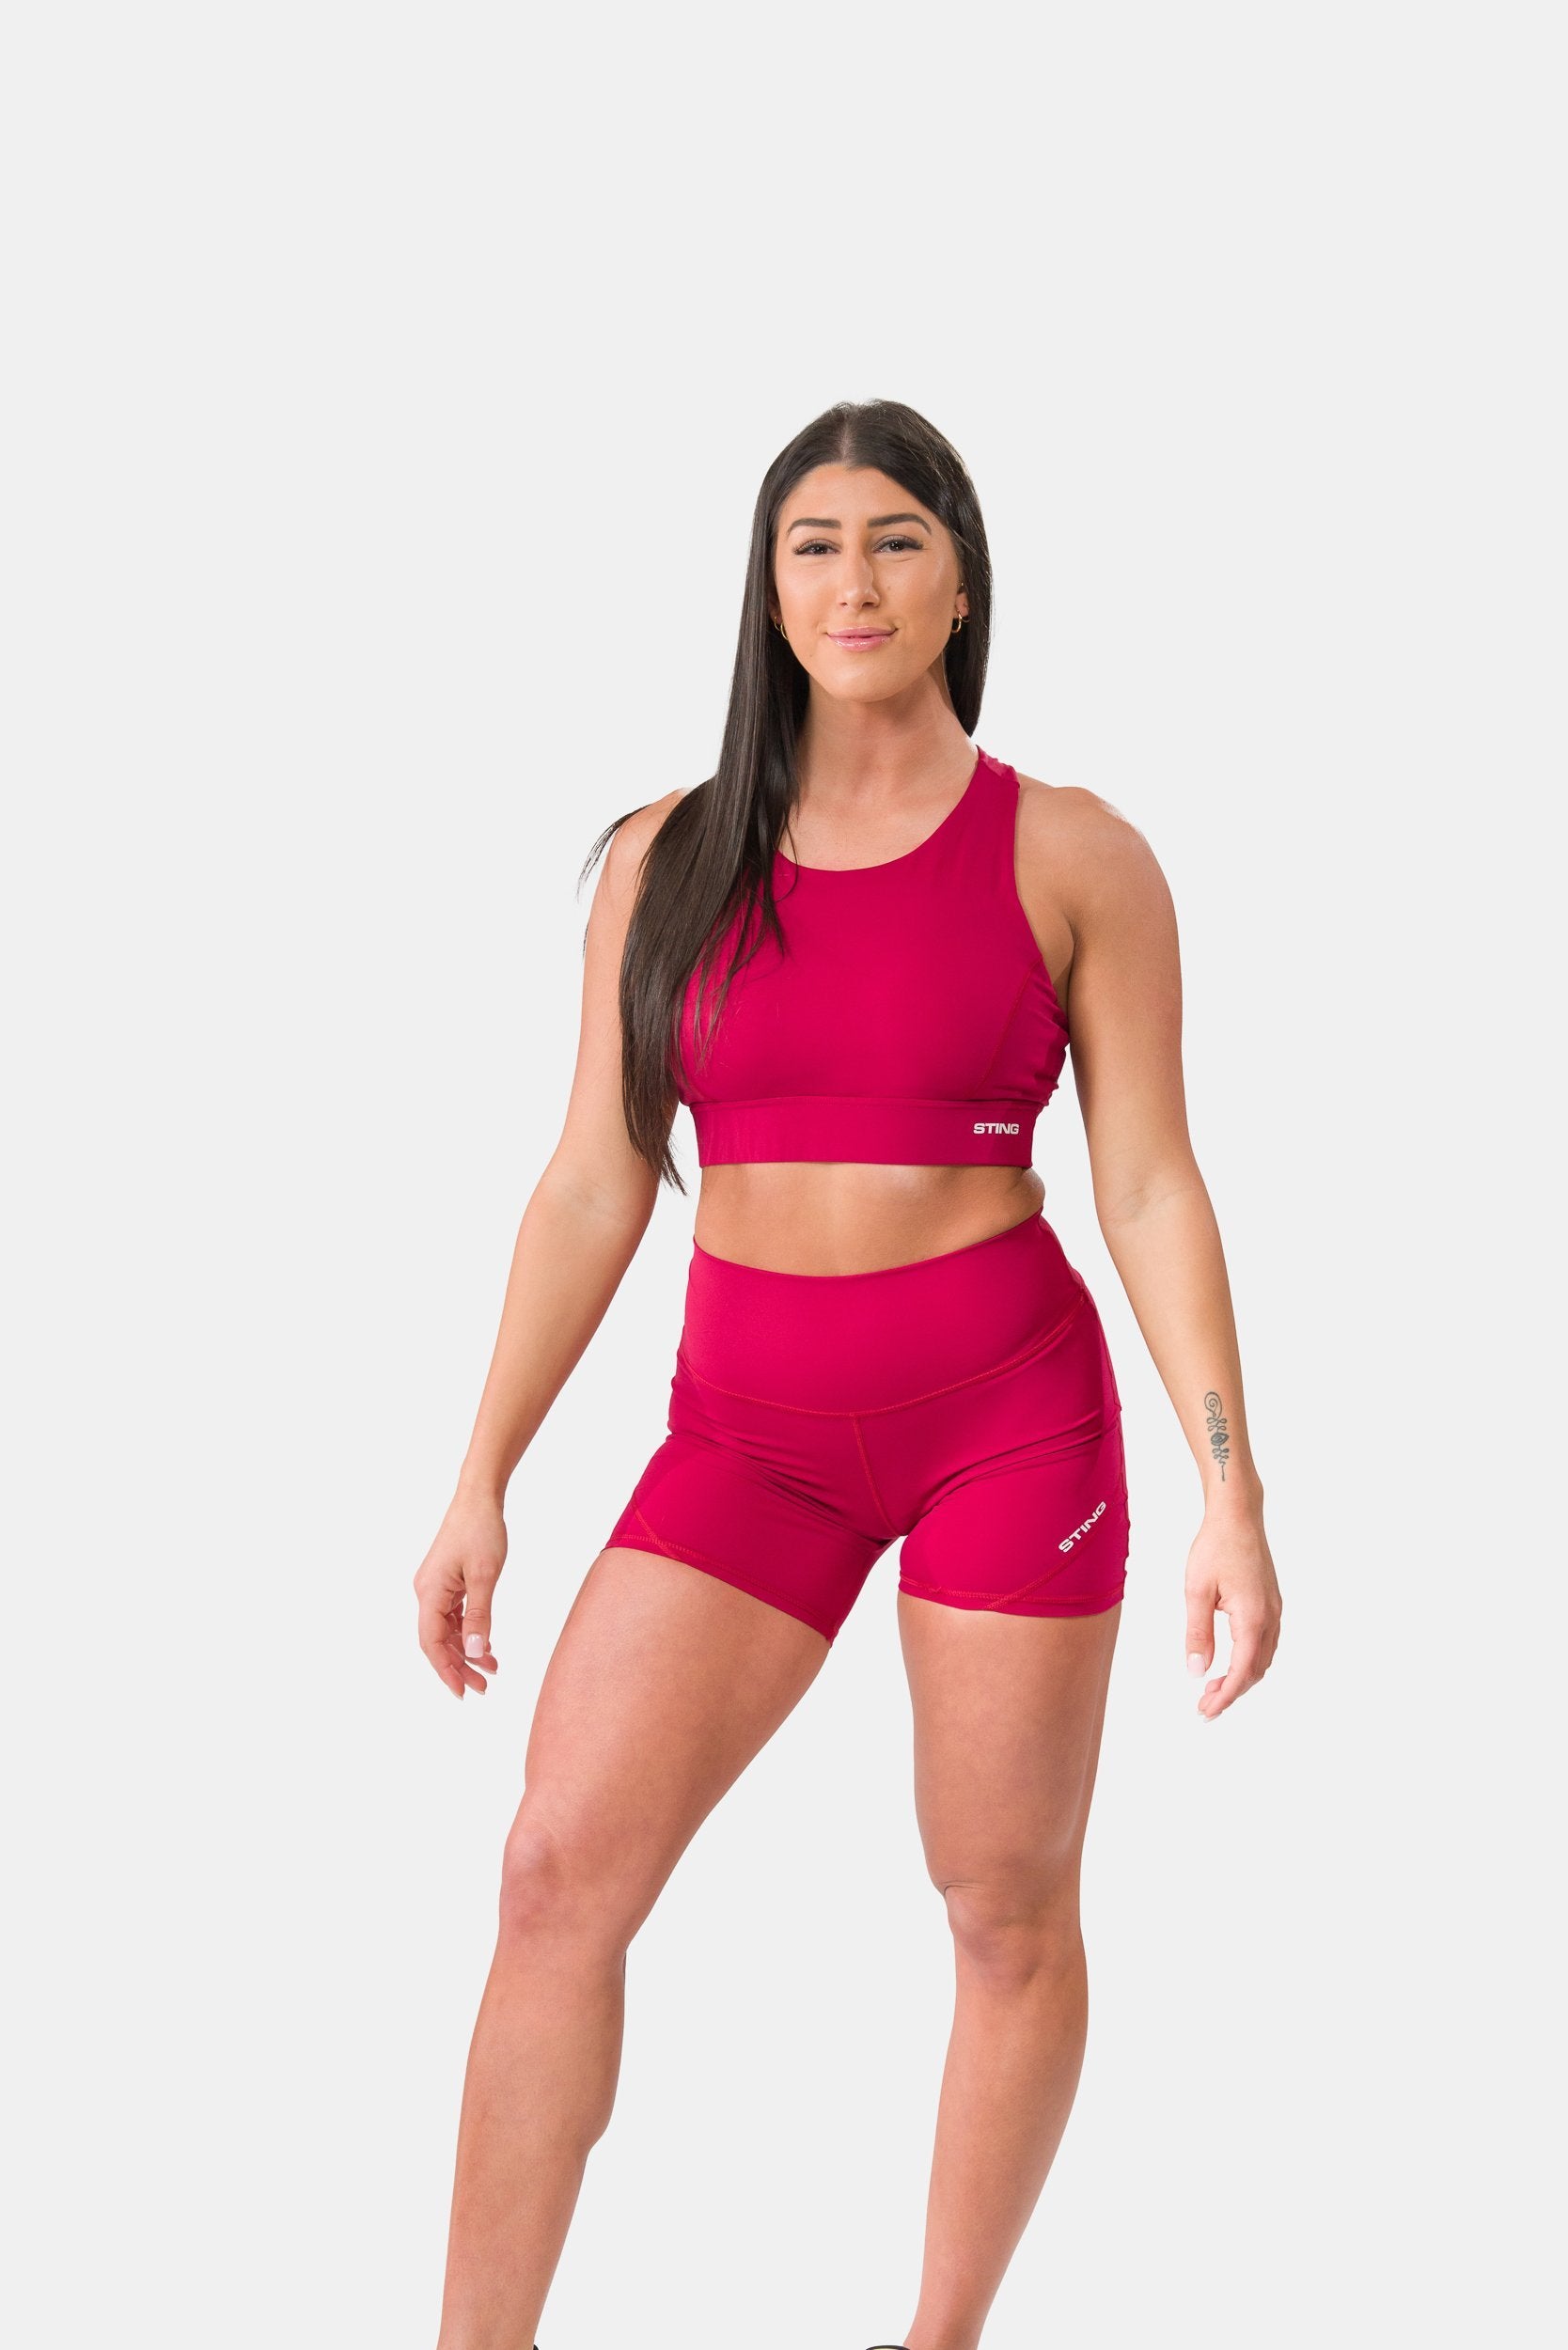 Women's Activewear & Workout Clothes for Women  Sports Wear For Women – Sting  Sports Canada ᵀᴹ